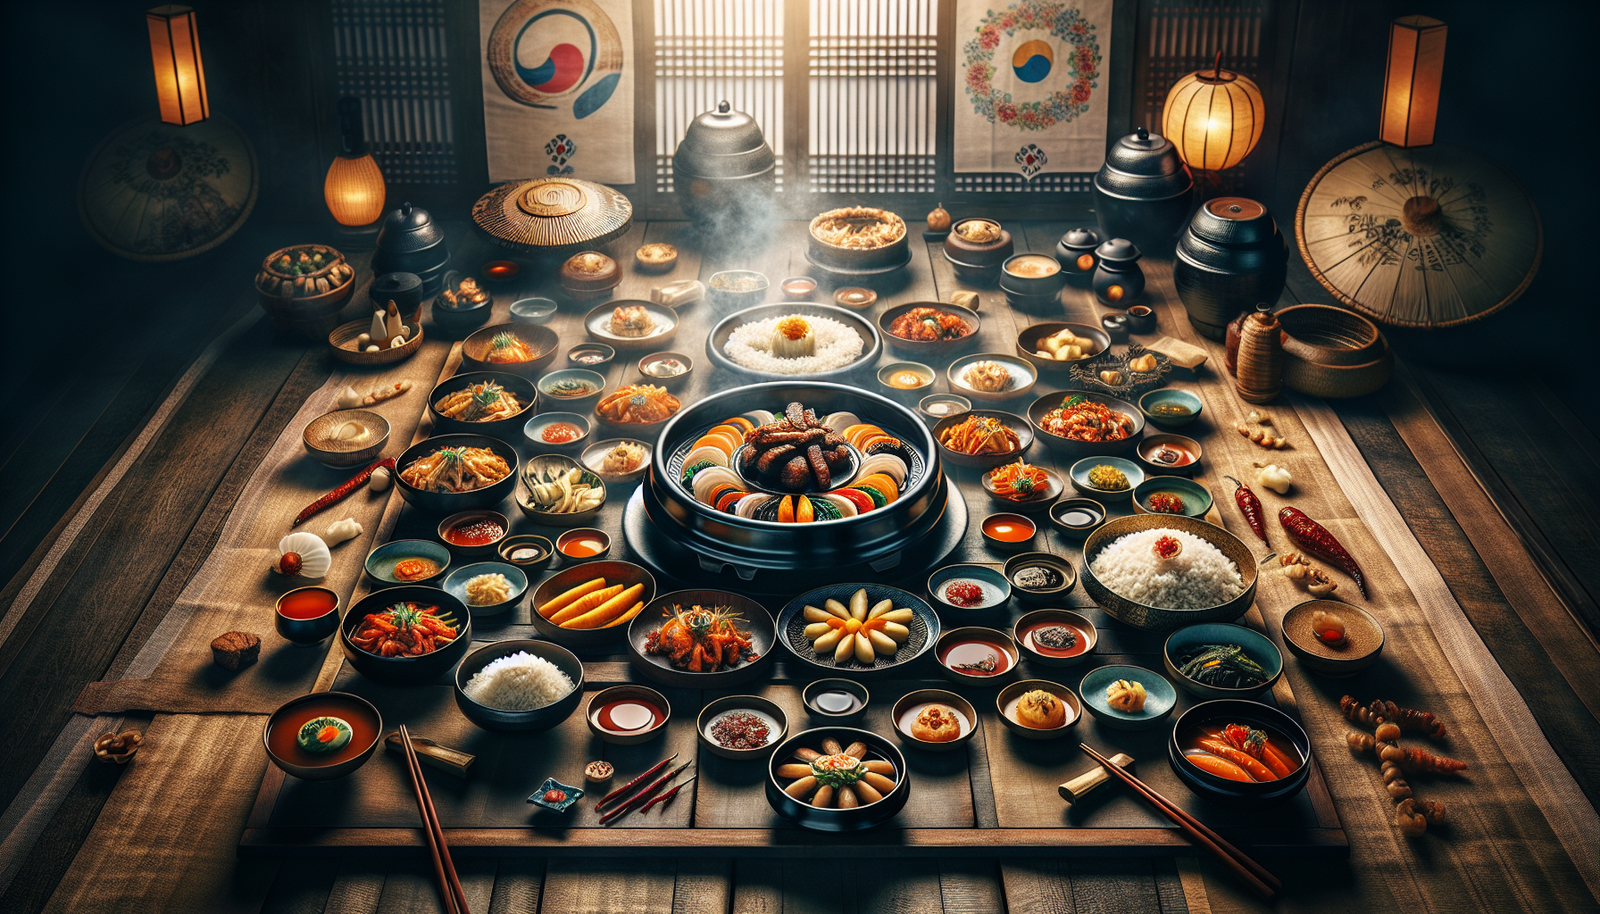 Can You Share Some Stories Or Legends Related To Korean Food?